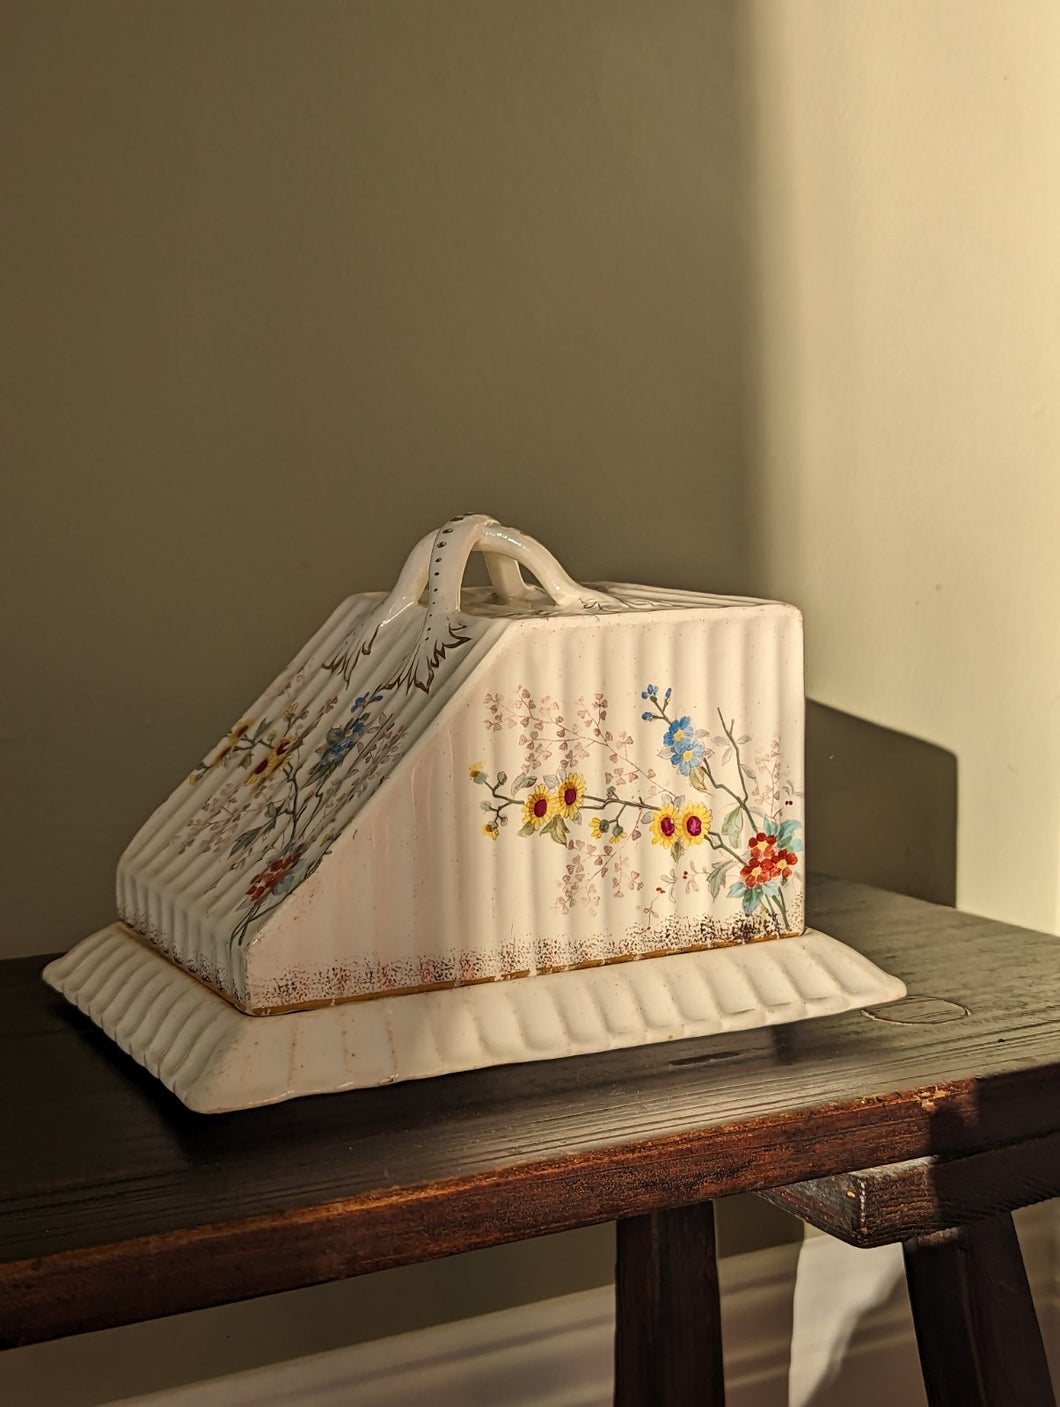 19th Century Cheese Keeper Butter Dish by Franz Ant Mehlem